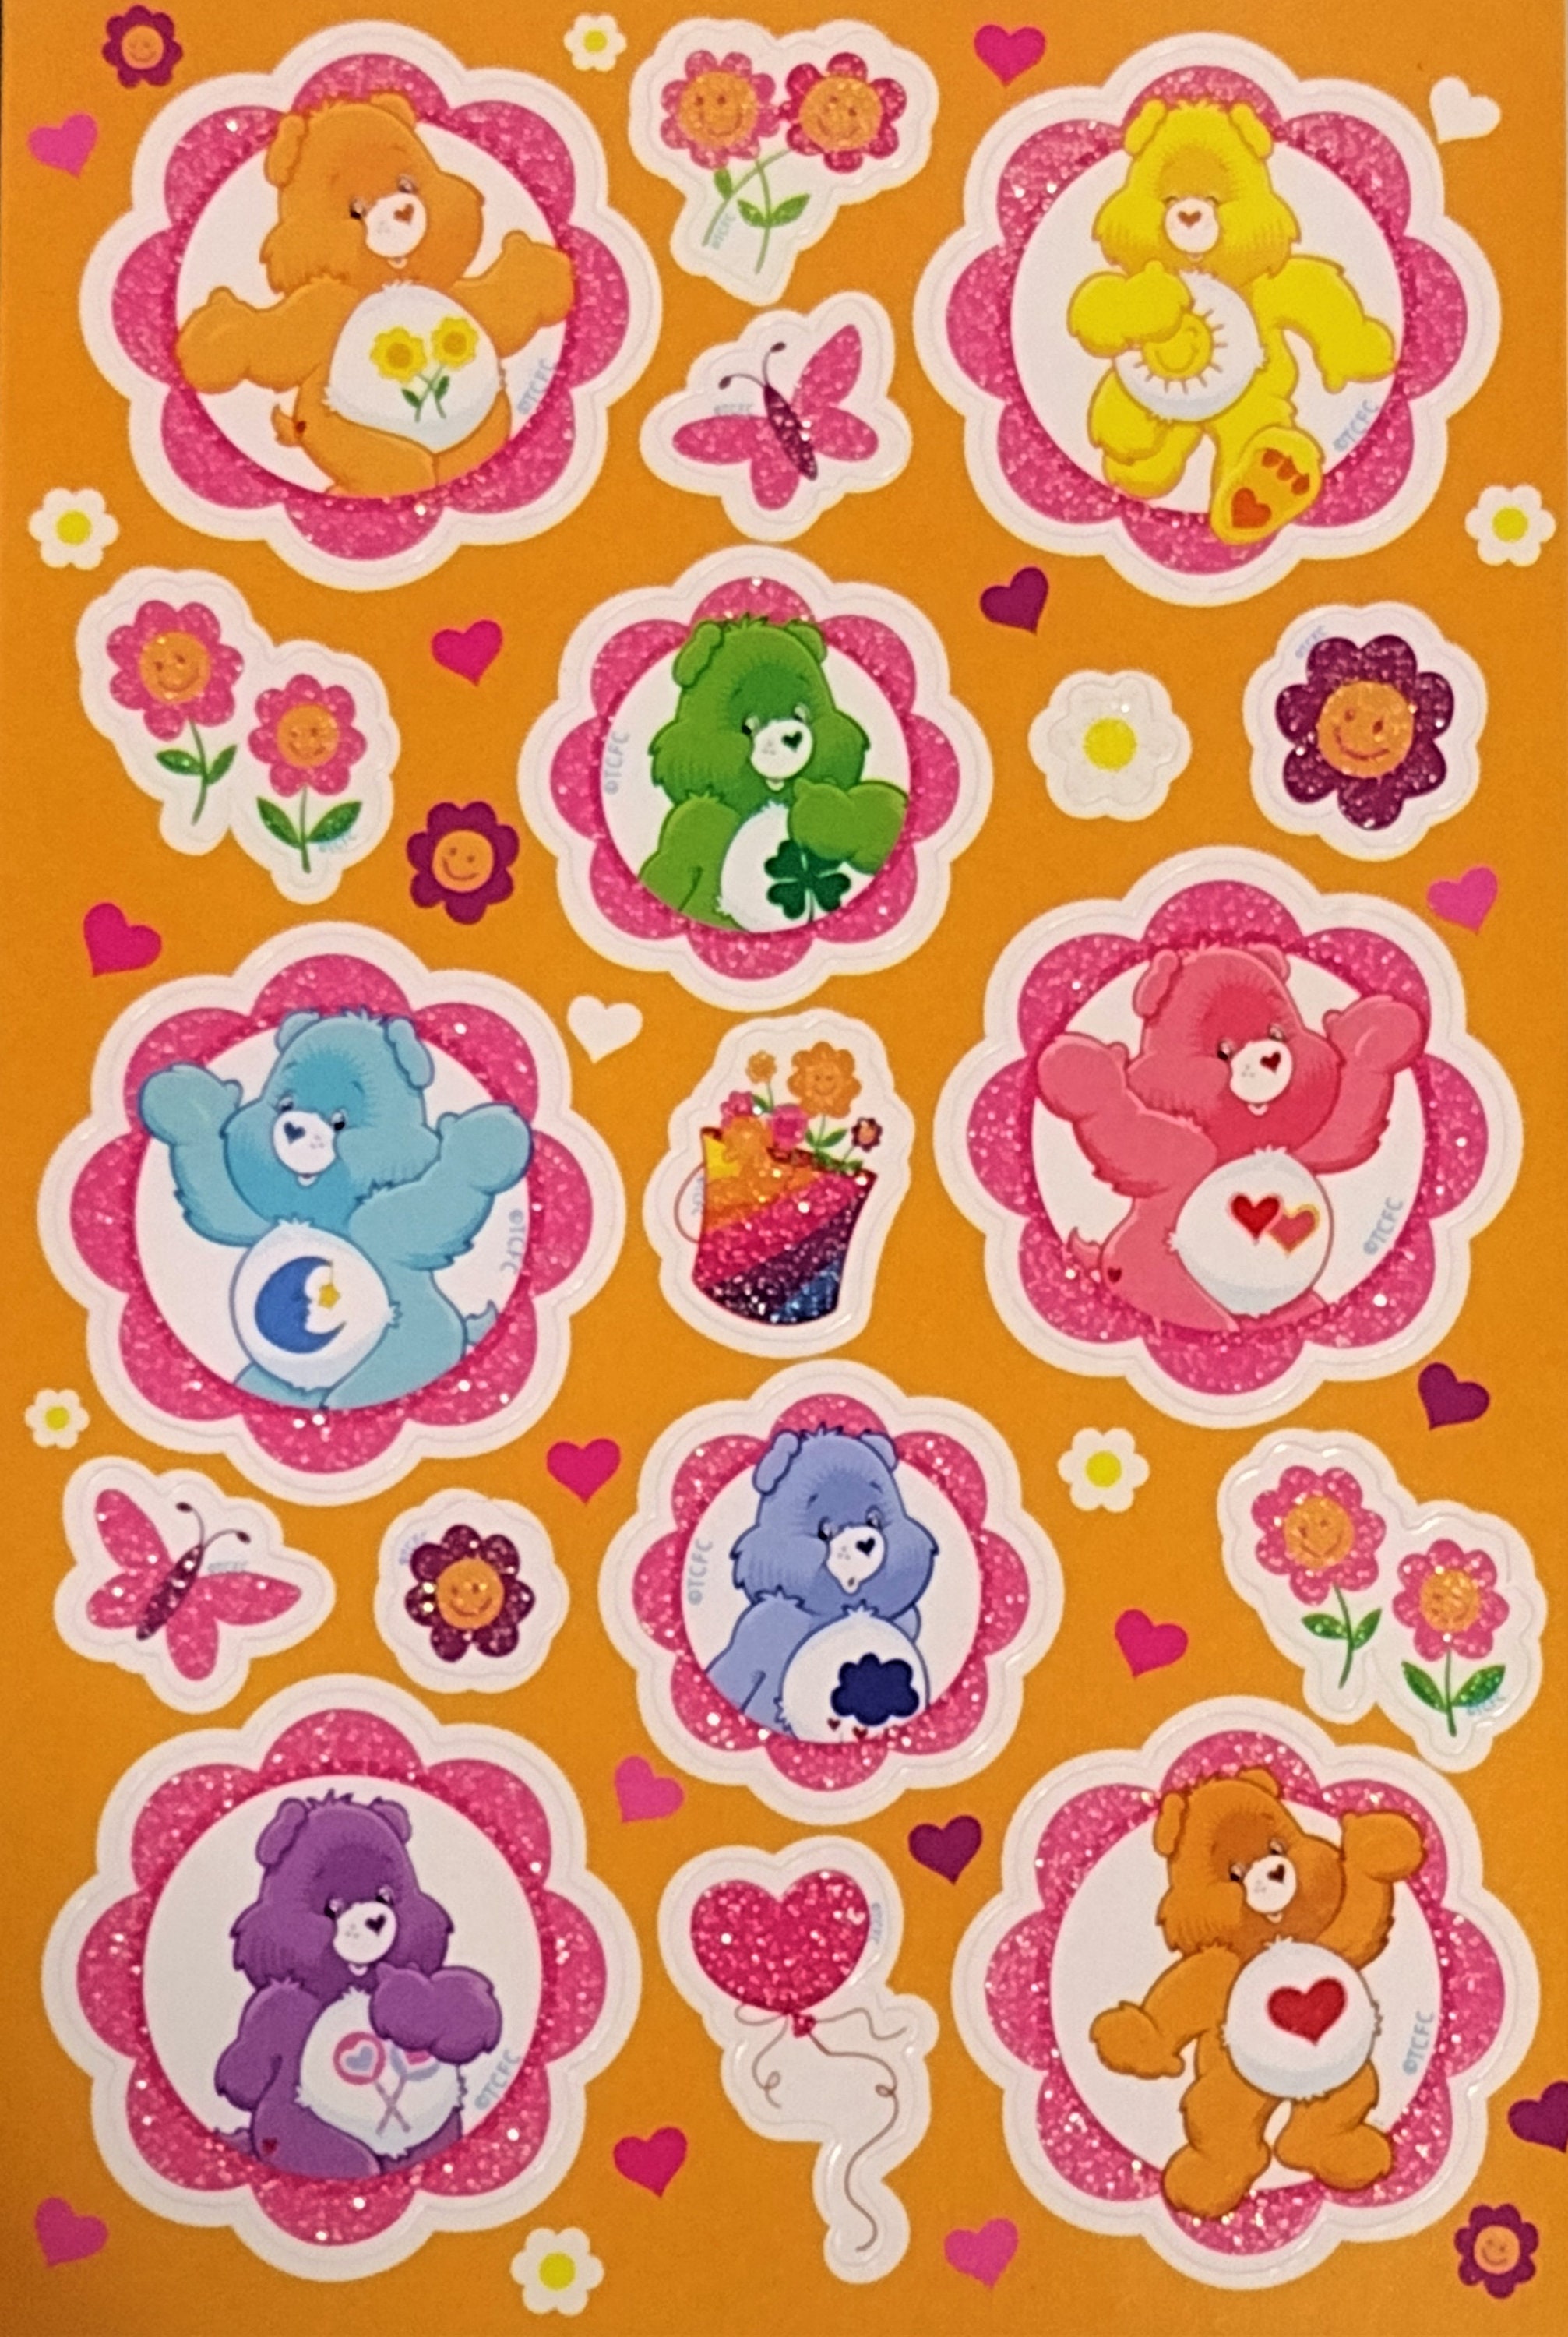 Care Bear Stickers, these are from 2000., Fantastic Plastic Land